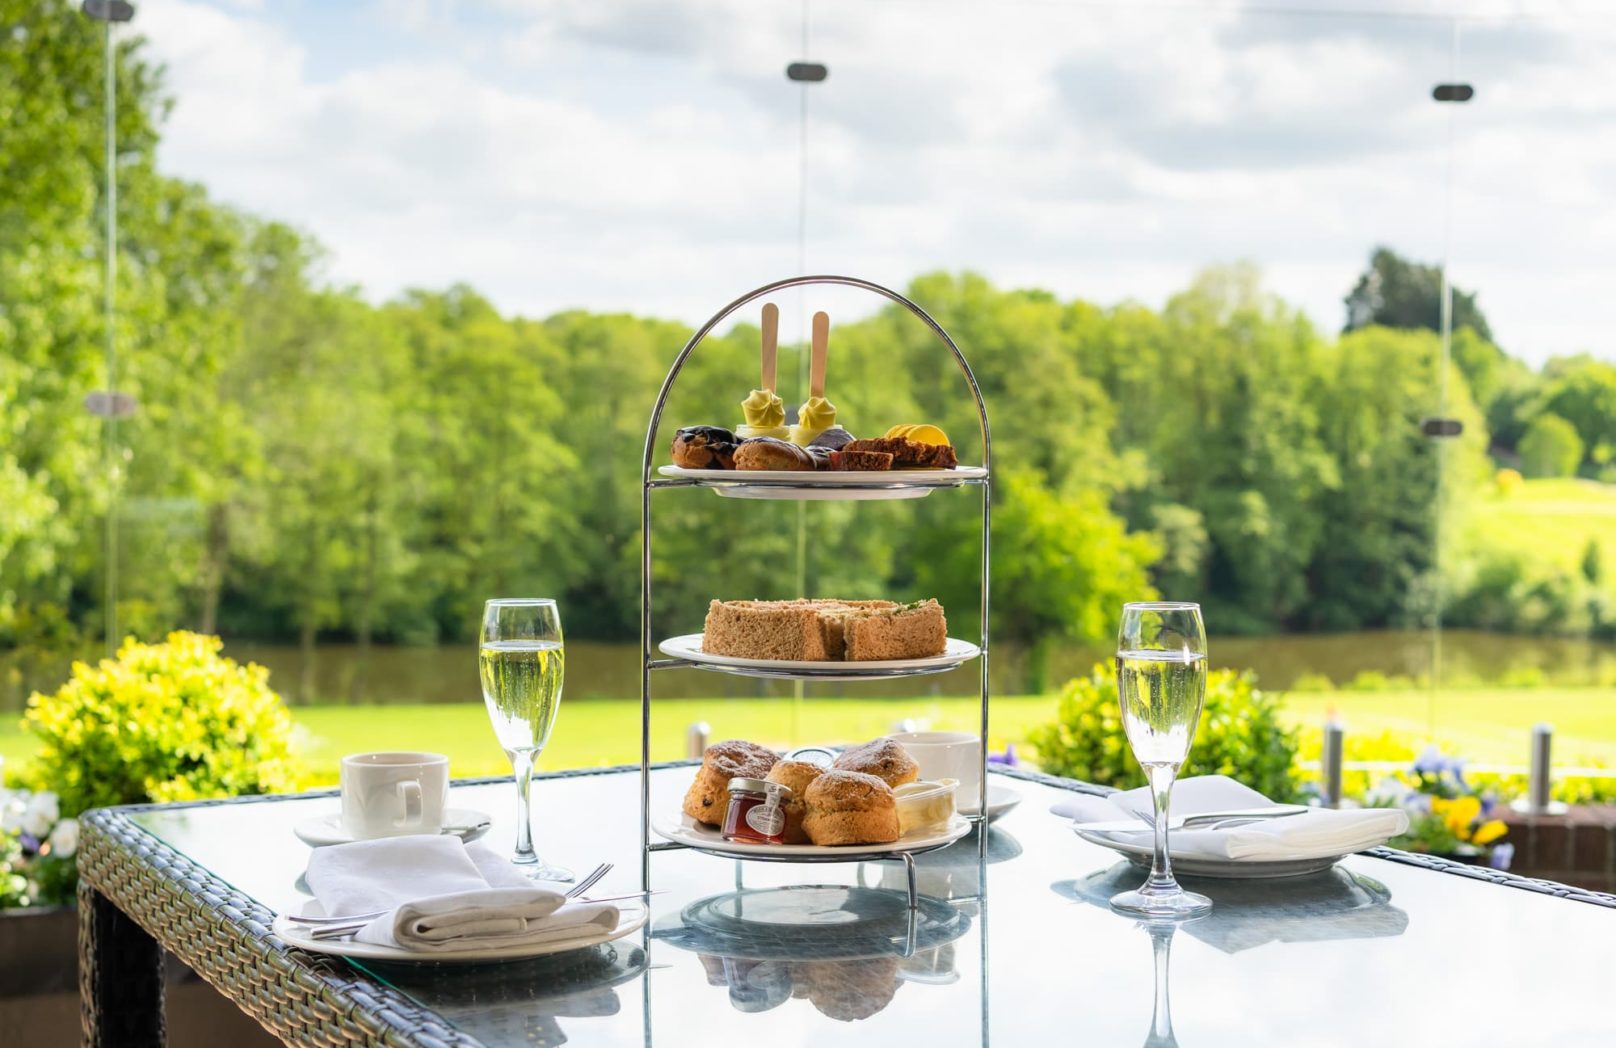 A stand of sweet Afternoon Tea with golasses or prosecco